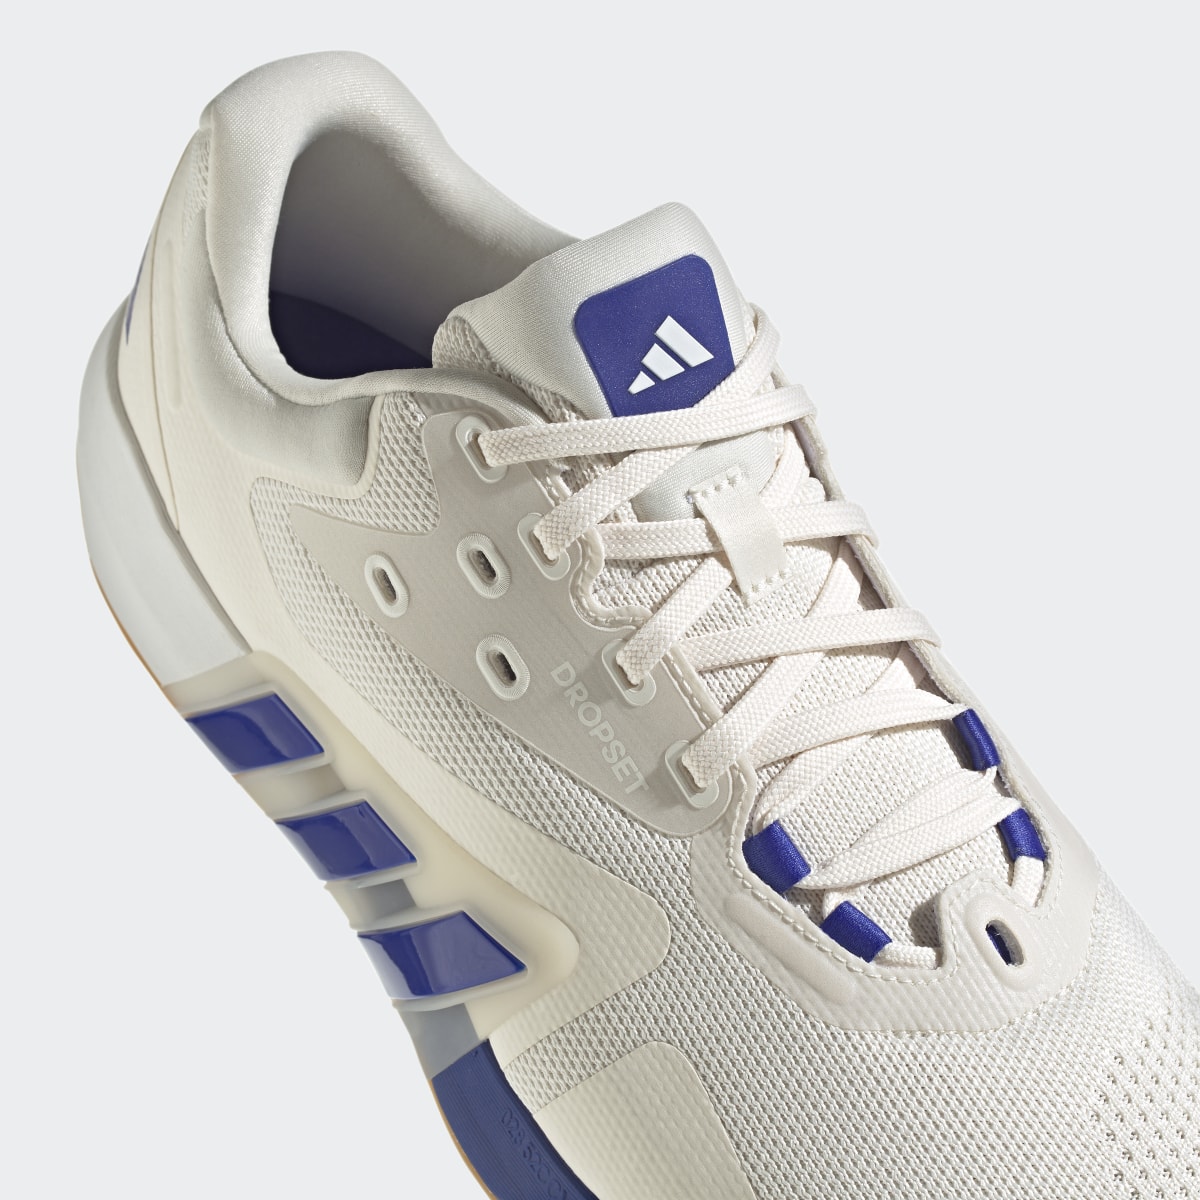 Adidas Dropset Trainer Shoes. 4